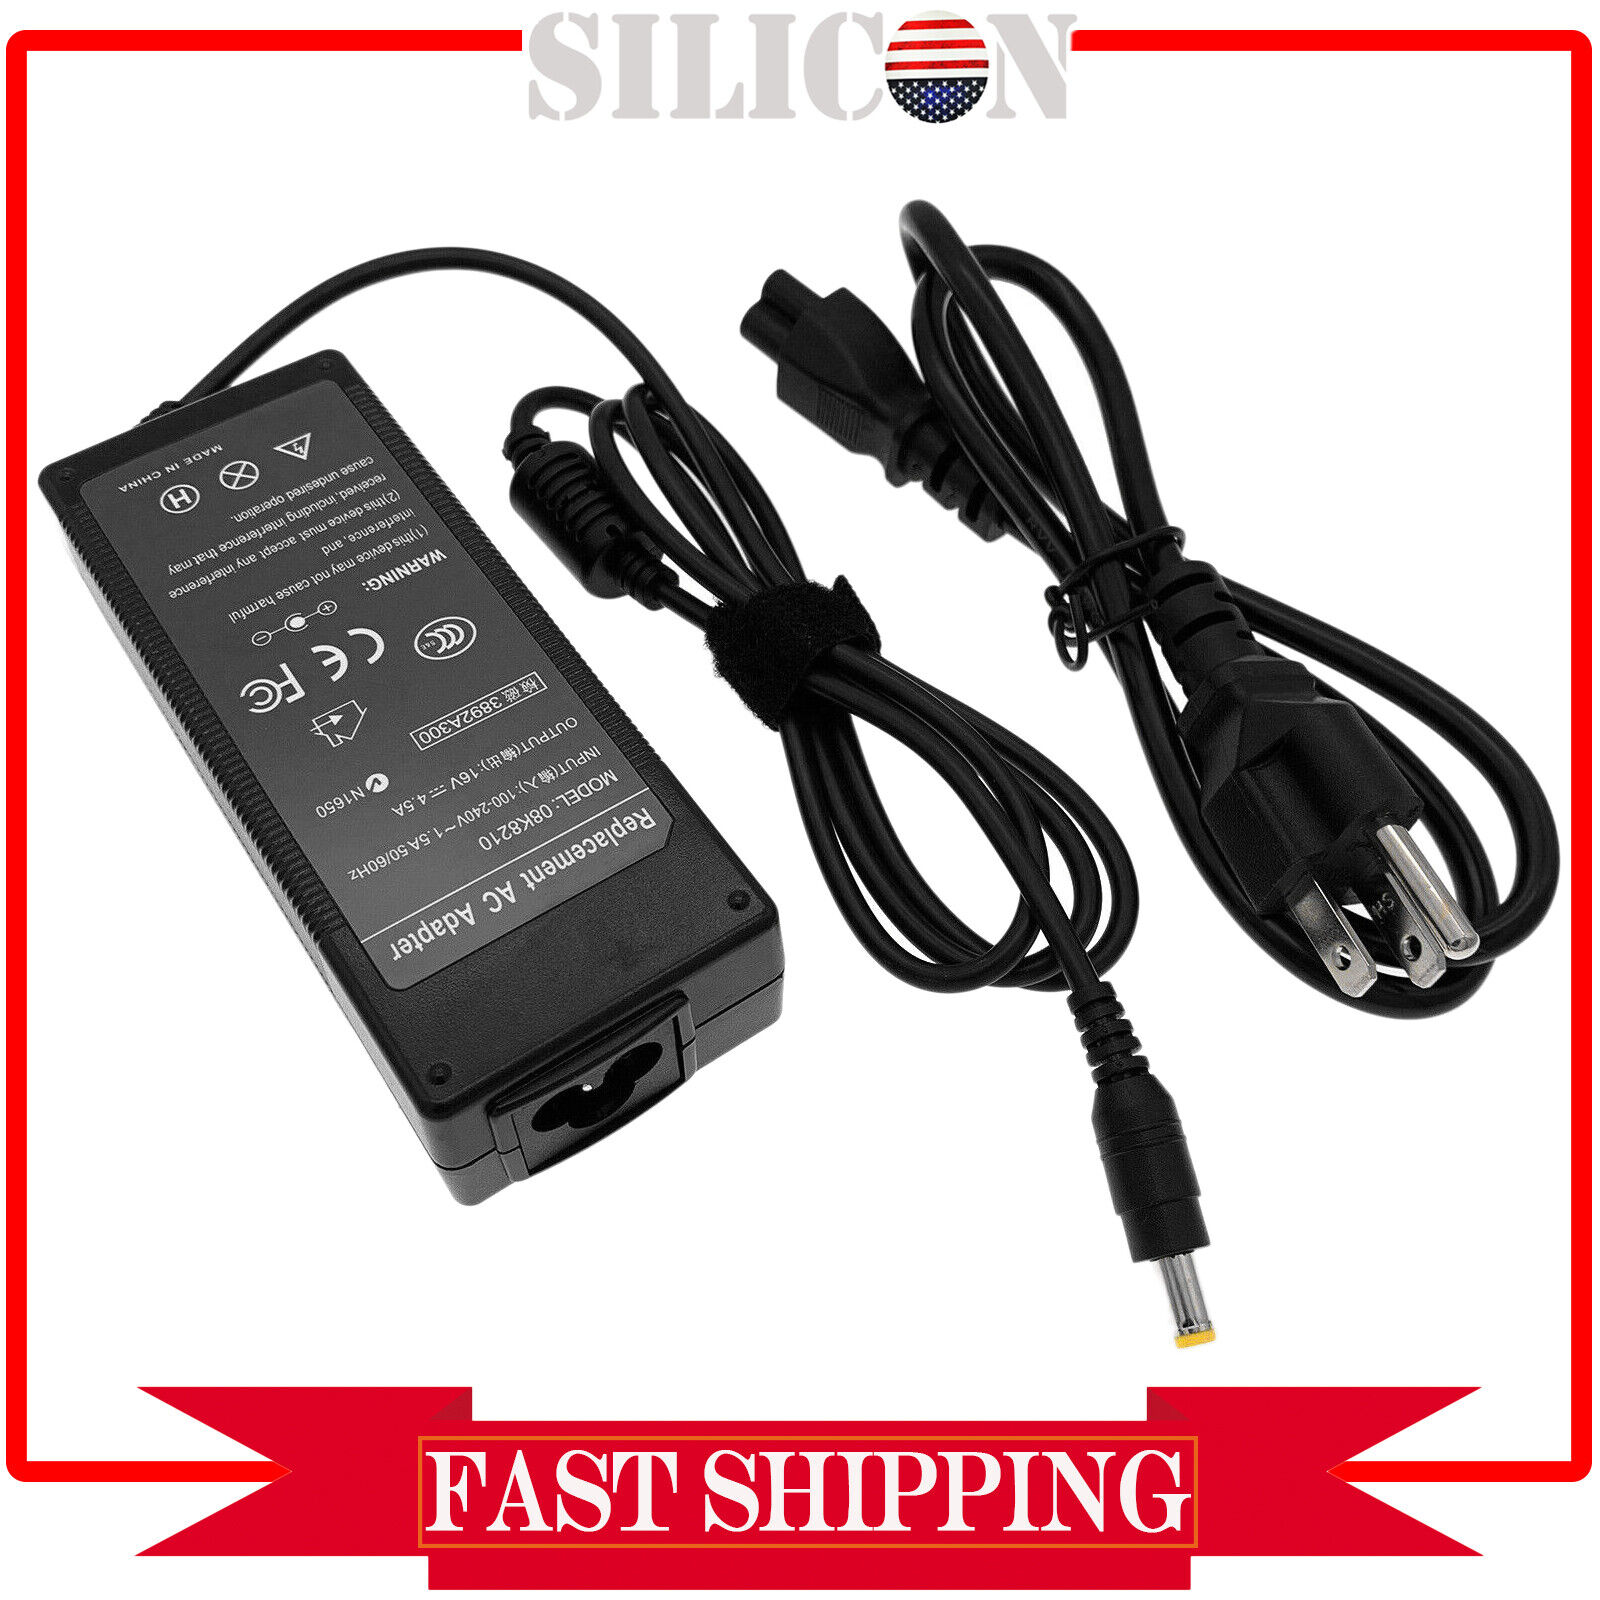 AC Adapter Power Cord Battery Charger For IBM Thinkpad A30 Type 2652 2653 2654